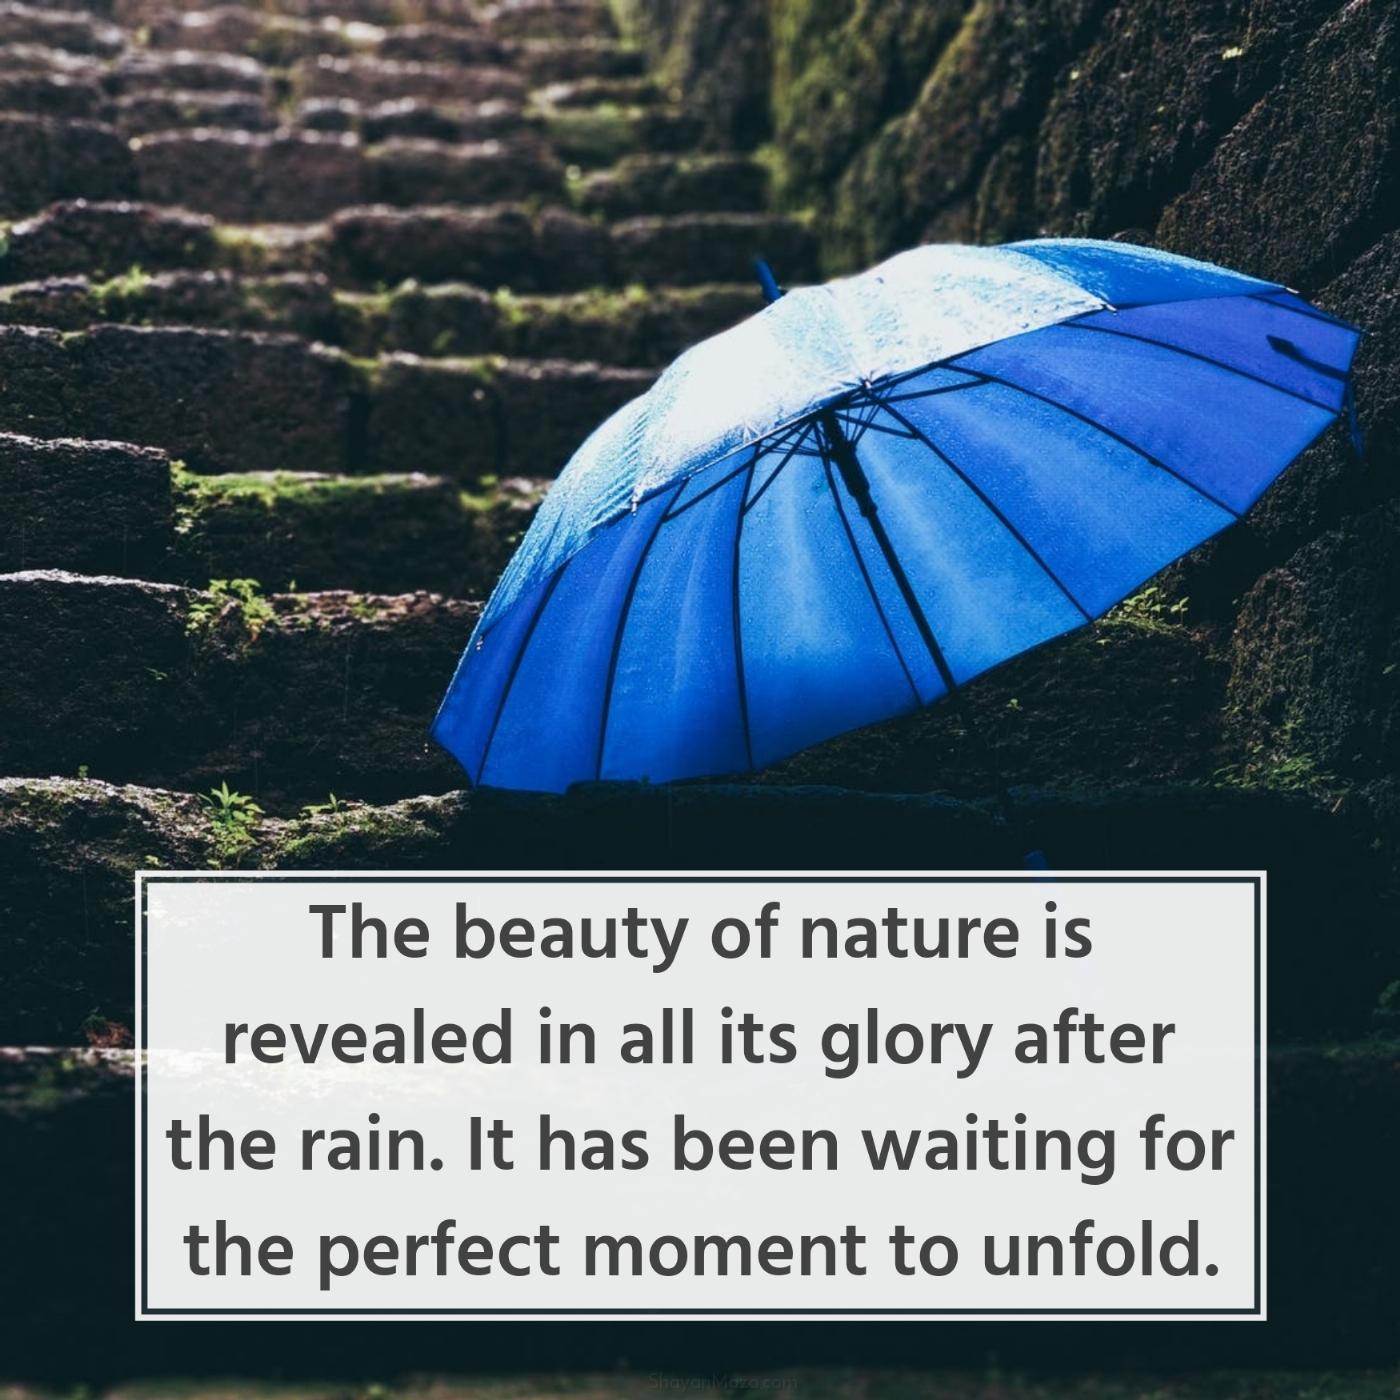 The beauty of nature is revealed in all its glory after the rain